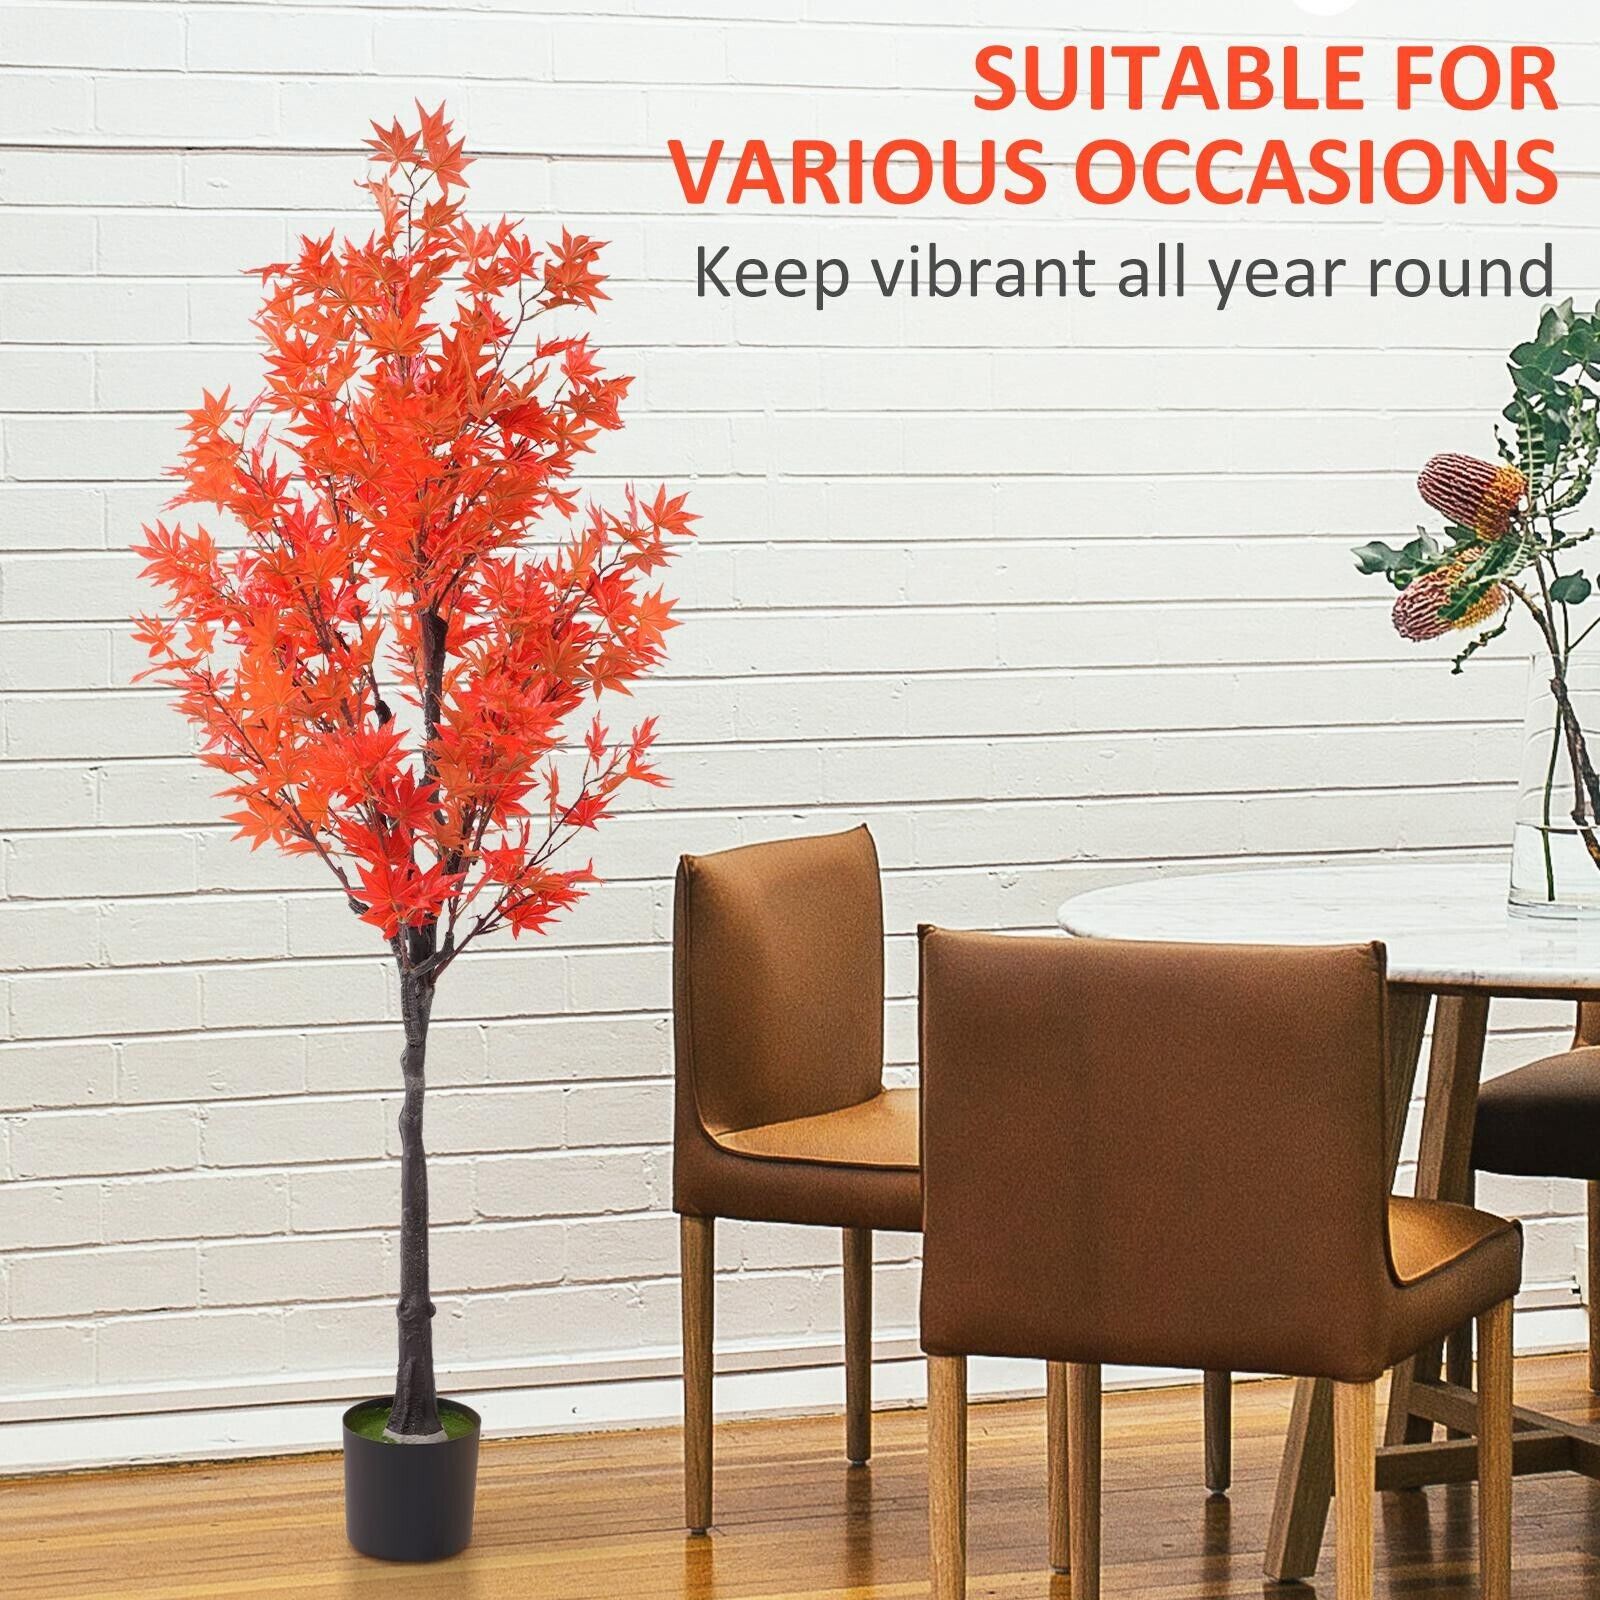 (Out of Stock) 5.2' Autumn Maple Artificial Tree Plastic PEVA Leaf Home Decoration